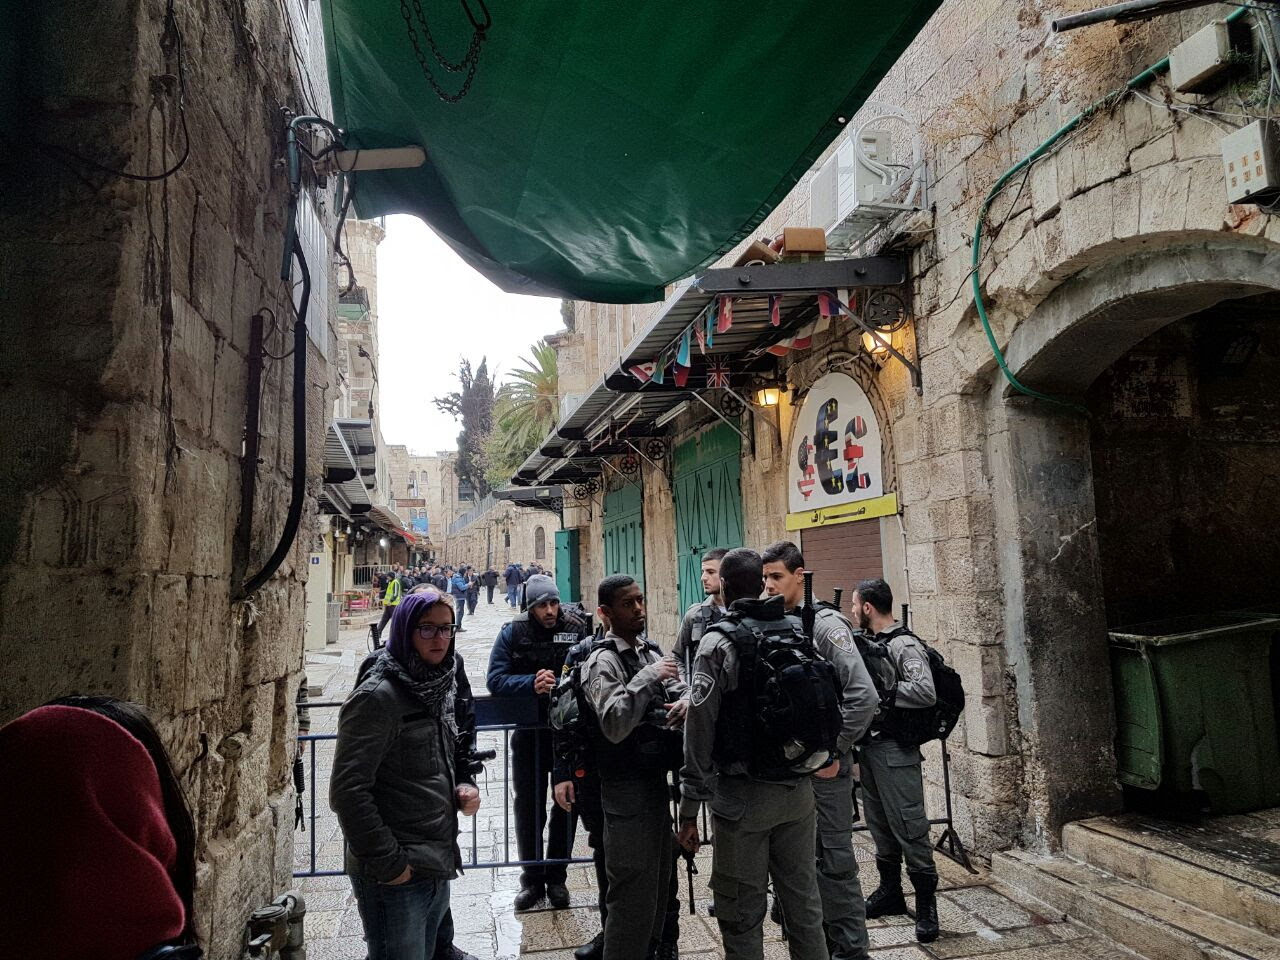 Police in the Old City of Jerusalem following a terror attack - Dec. 14, 2016